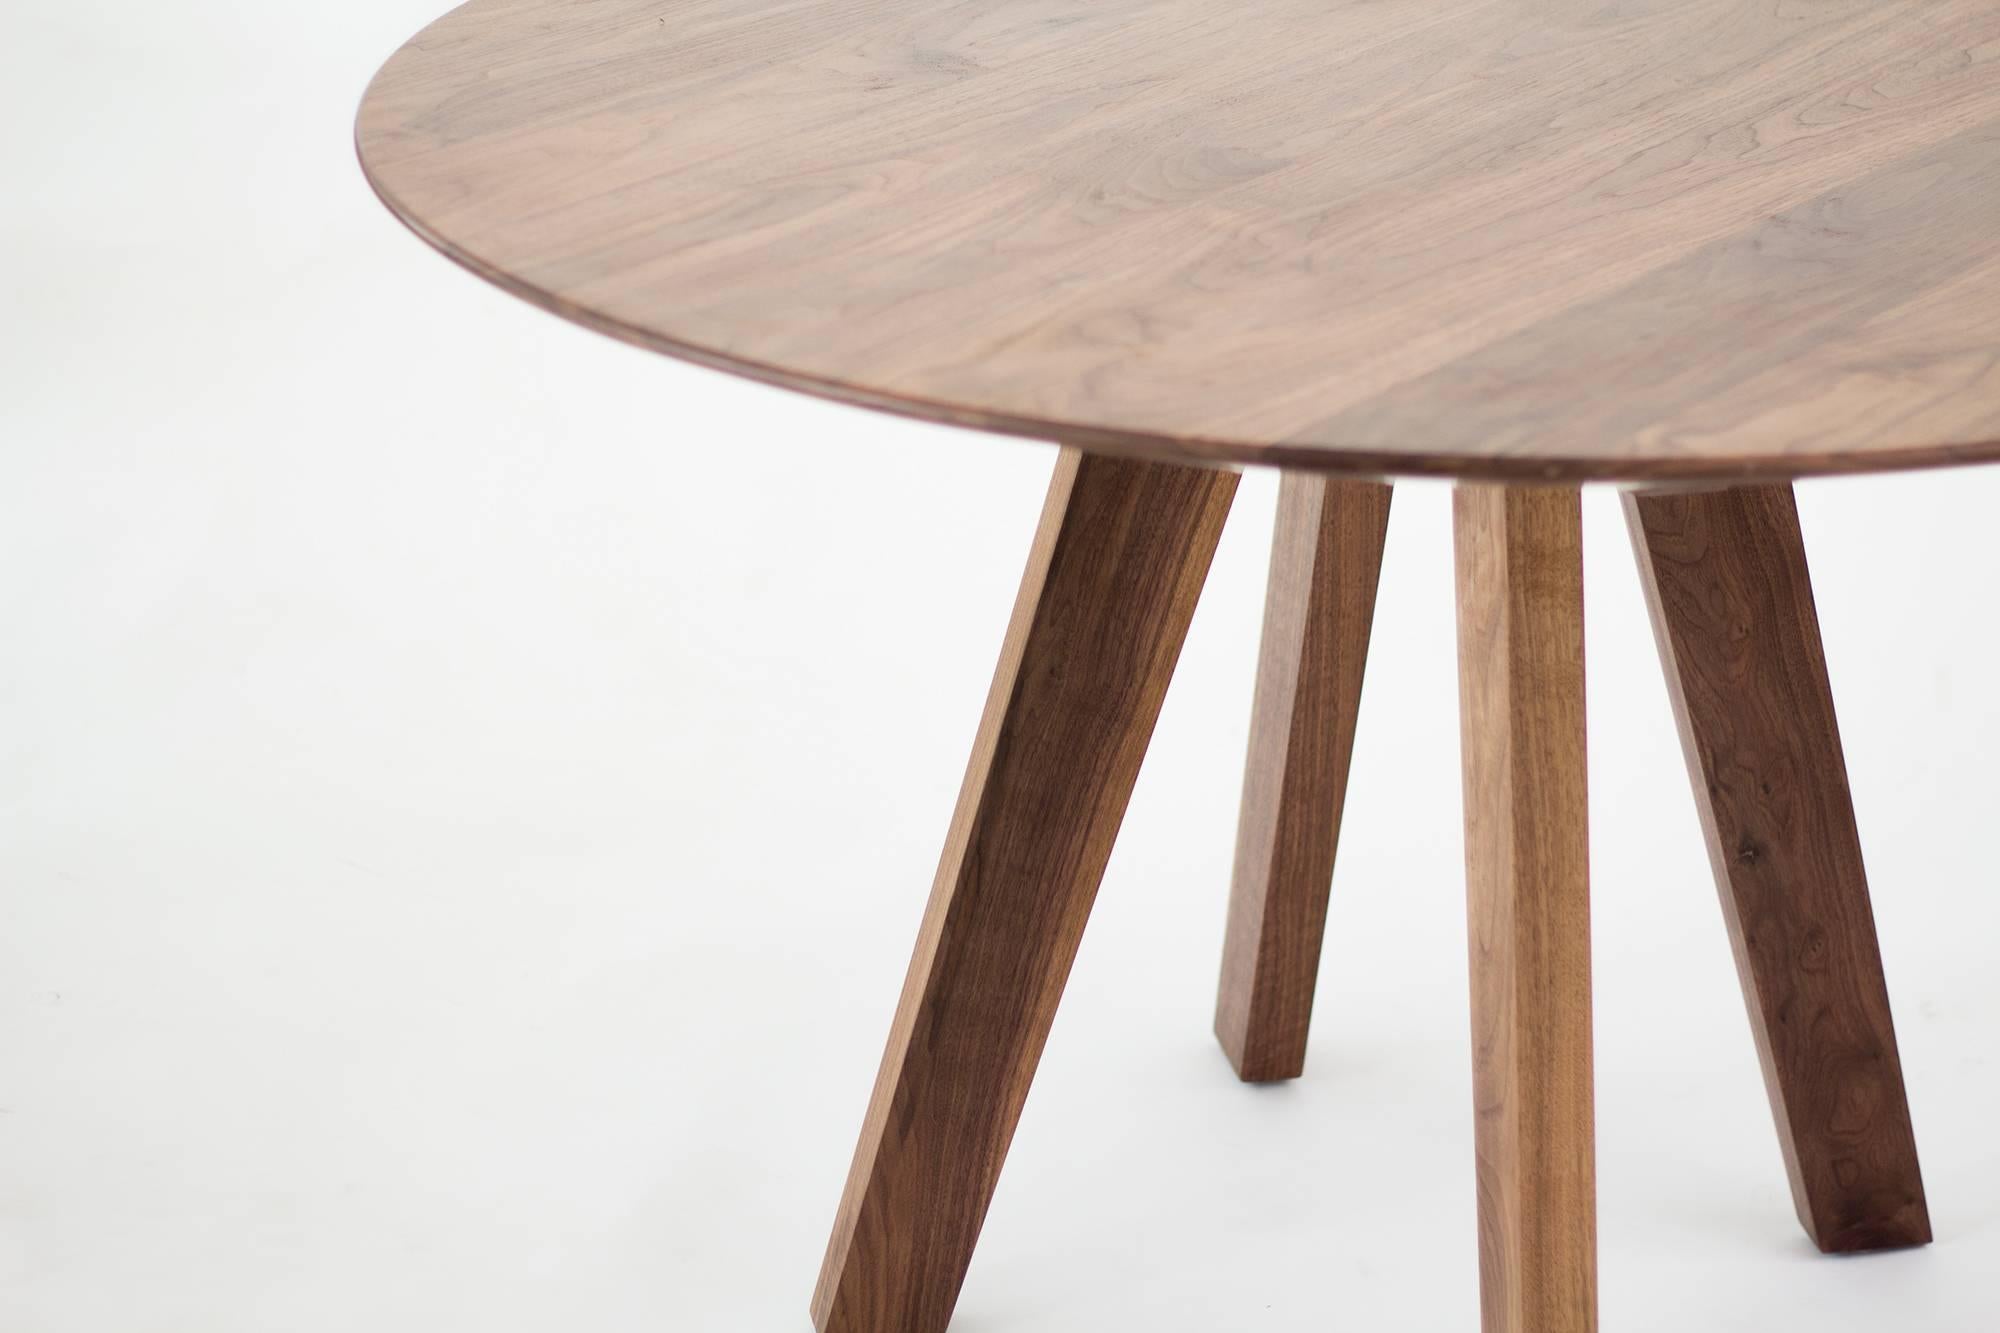 The Regia table is a timeless dining table that guarantees continuity over trends. The materials carefully selected transmit strength and versatility

The table is composed of a structure of four legs in walnut wood, where the beautiful 35mm